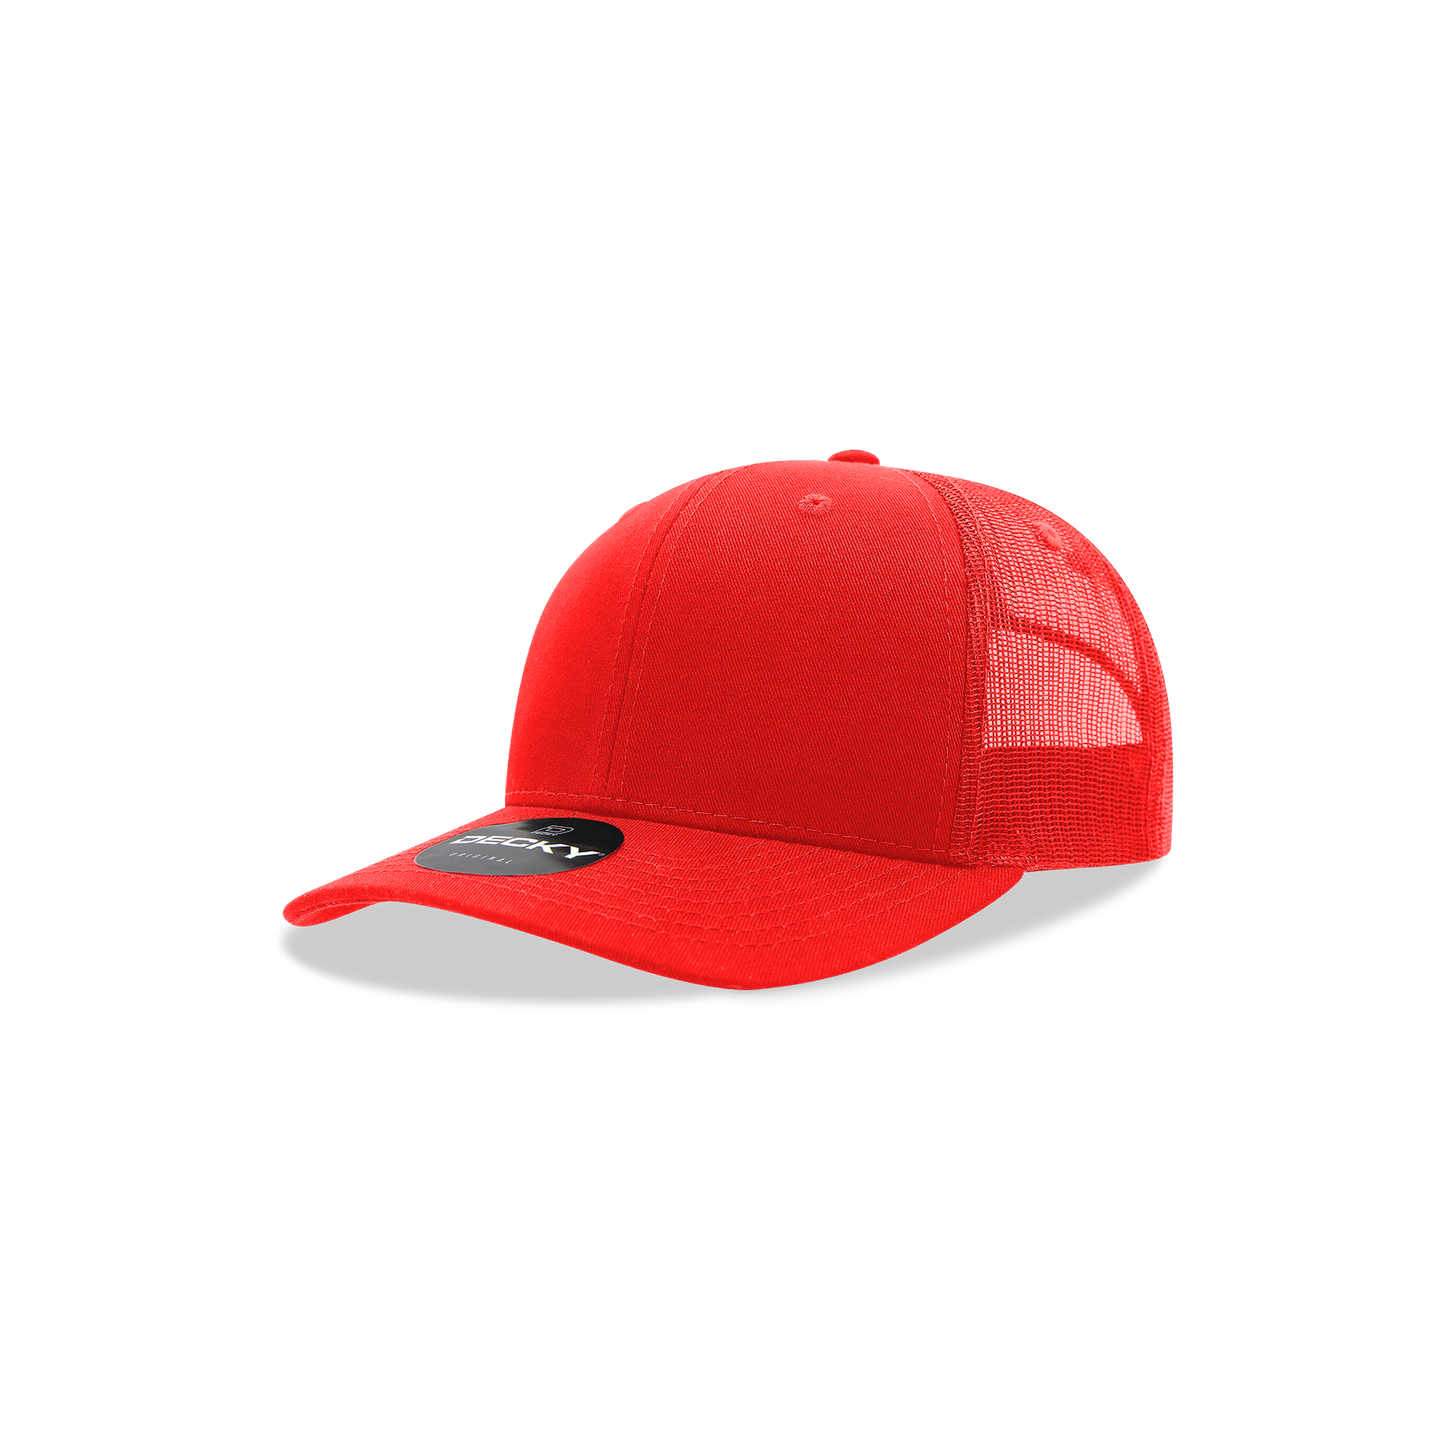 Kids, Youth Classic Trucker, Snapback Hat - Decky 5019: Red